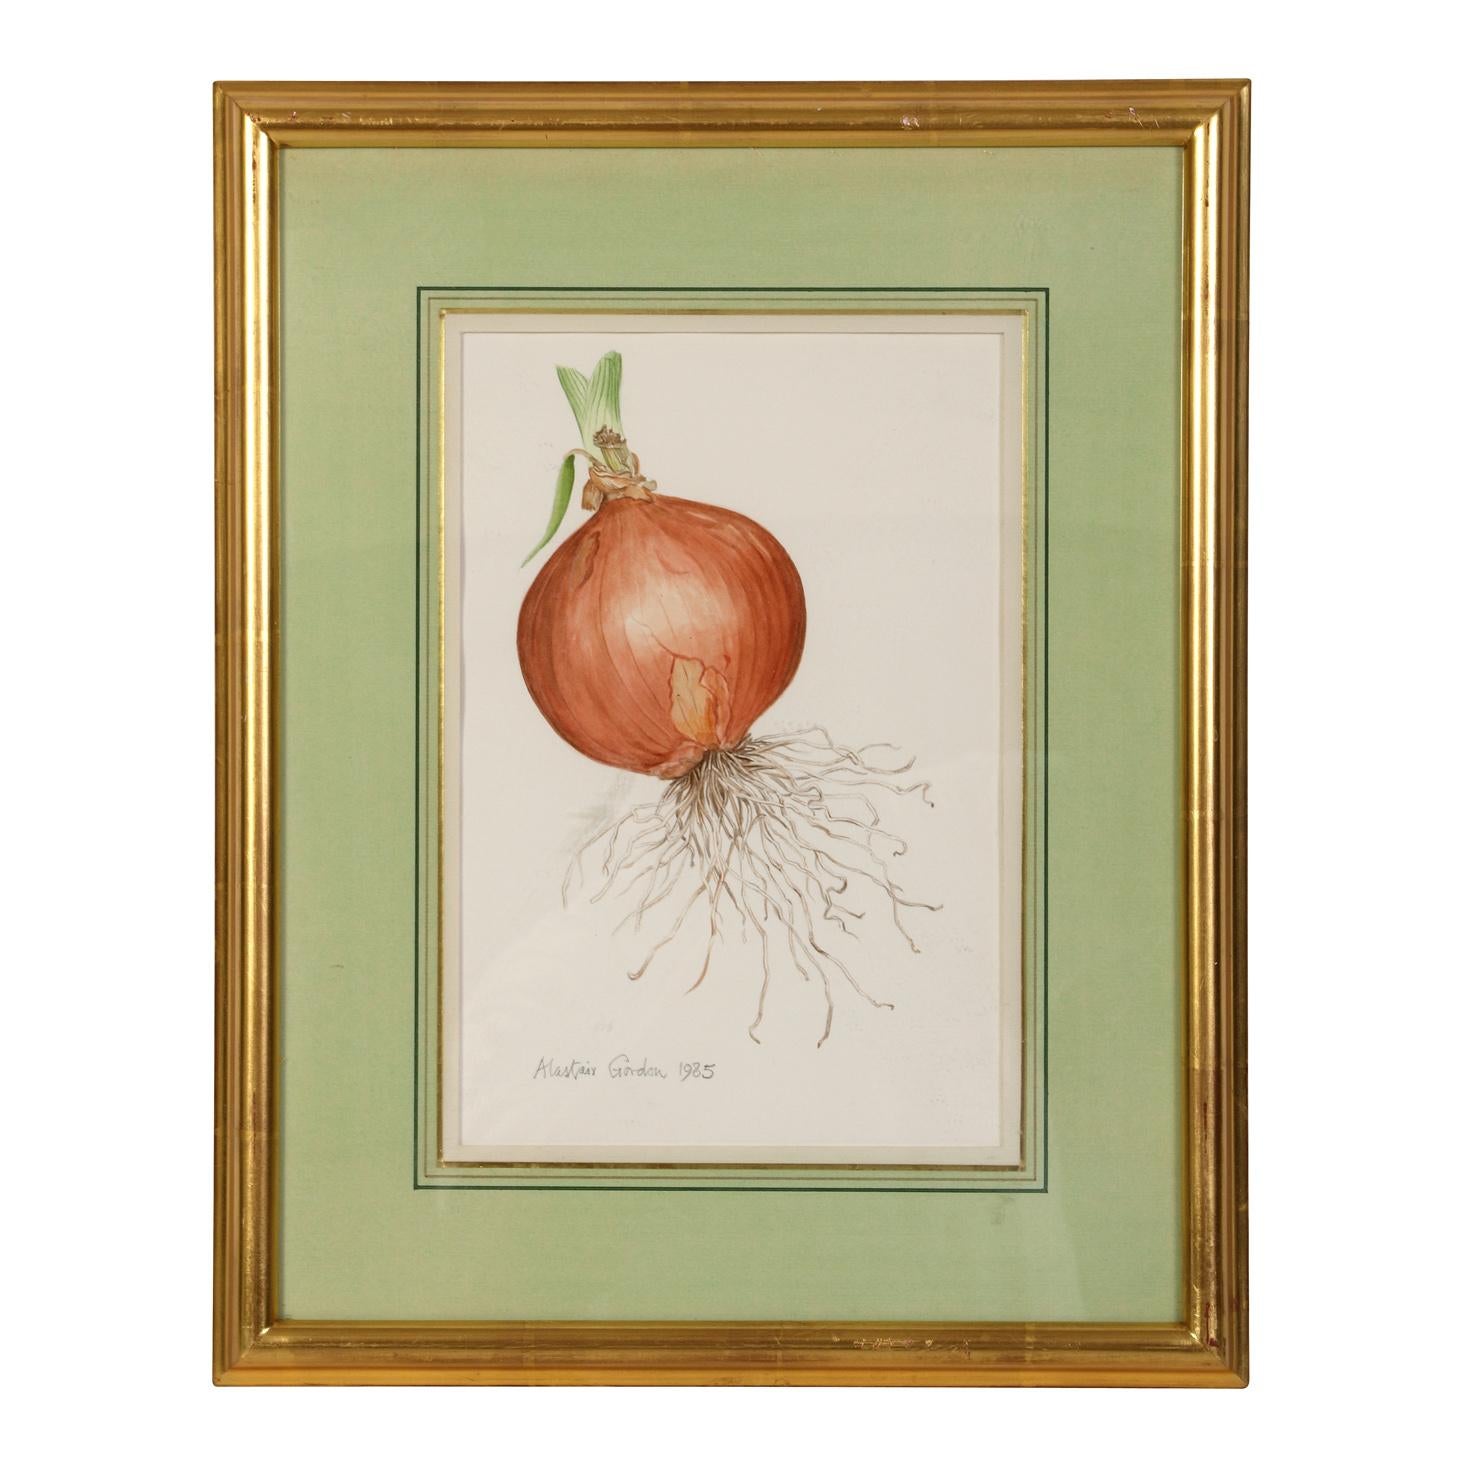 A set of three framed fruit and vegetable watercolors signed by Alastair Gordon. The set is a captivating collection that effortlessly combines artistry and nature and features an array of vibrant and meticulously detailed fruit or vegetable